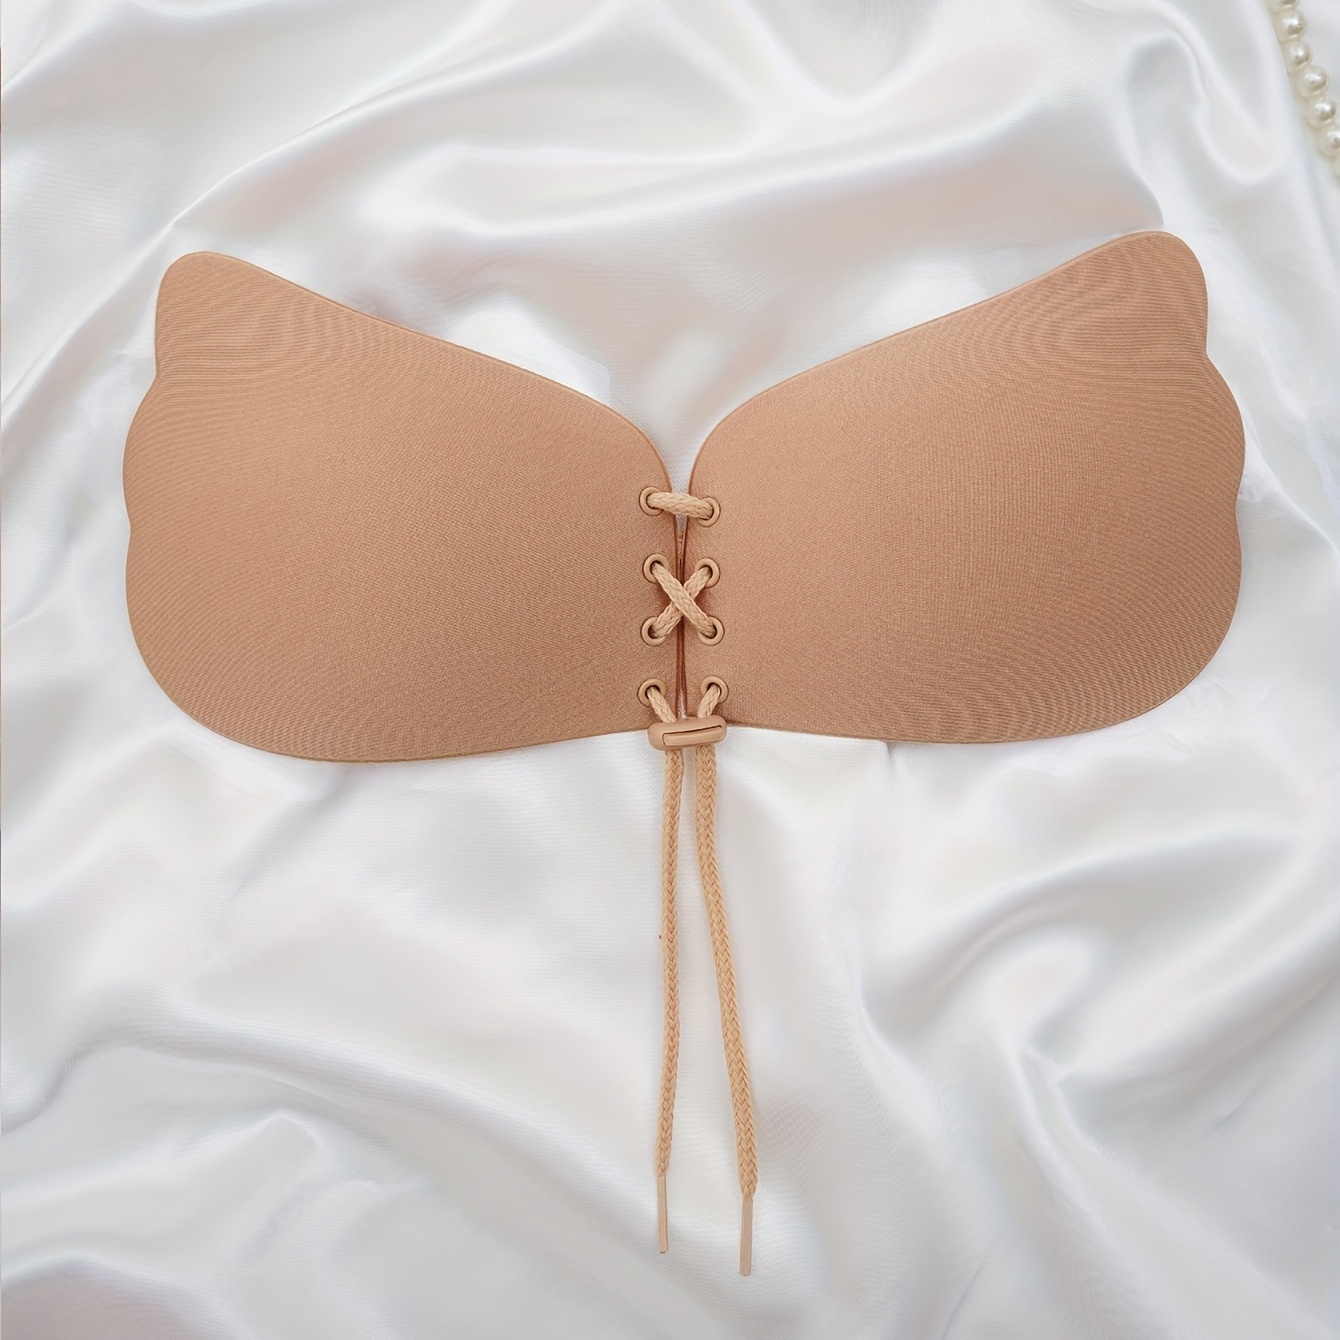  Adhesive Bras - DDD / Adhesive Bras / Women's Bras: Clothing,  Shoes & Jewelry